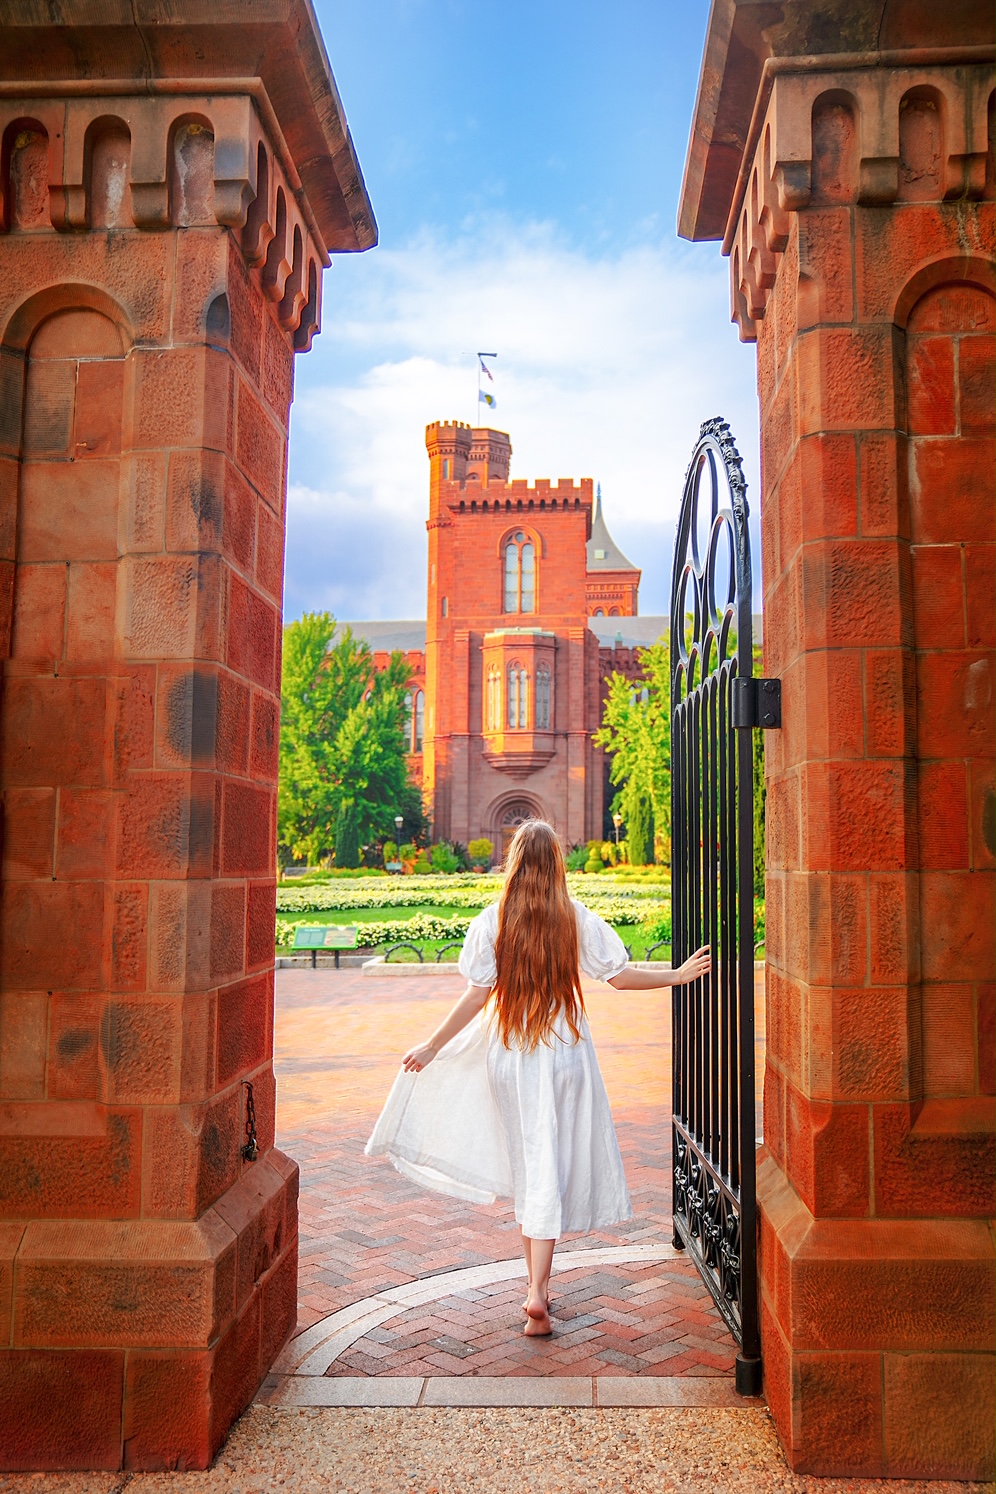 A woman in a white dress with long hair walking through the gate towards a garden. The garden has a brick pathway and there are yellow flowers. You can also see part of a large brick castle. Its one of the best things to do in Washington DC.